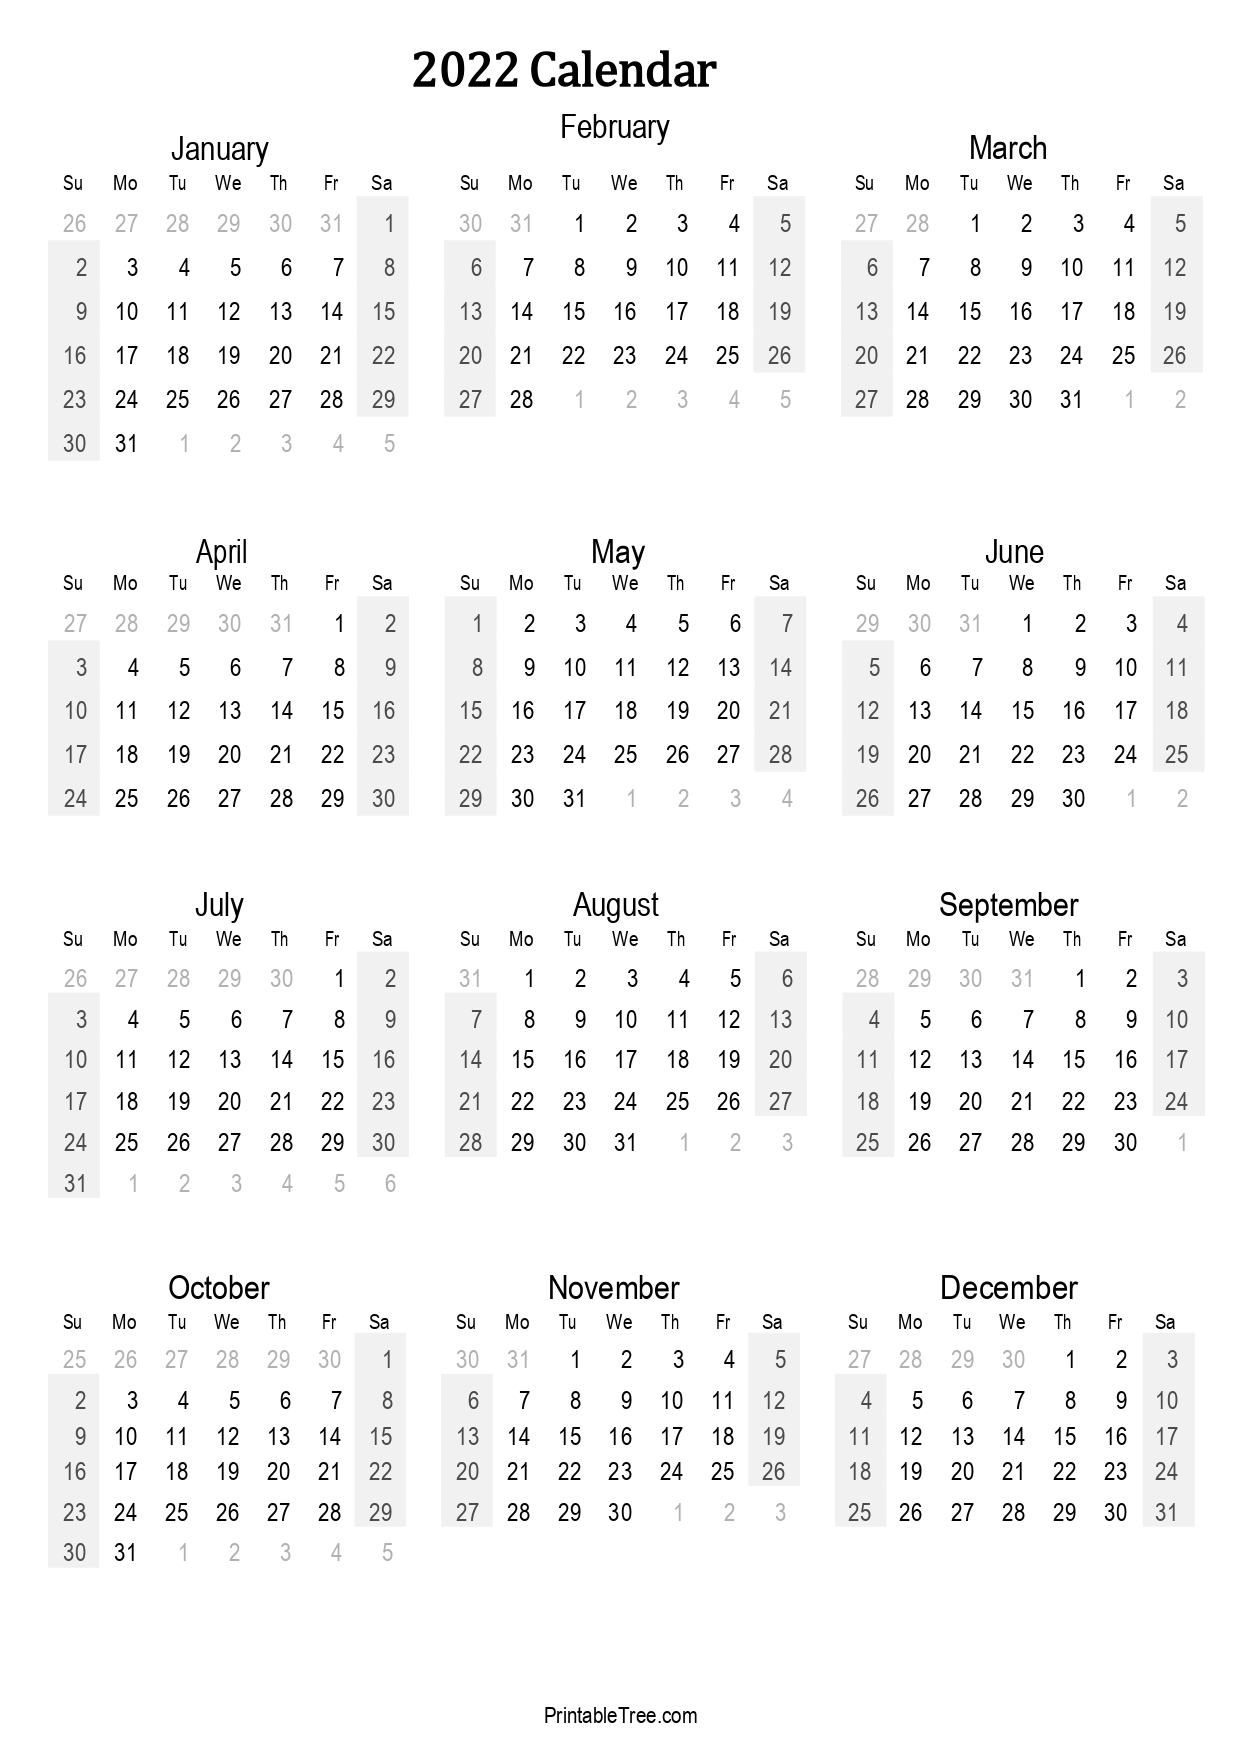 2022 Calendar one page